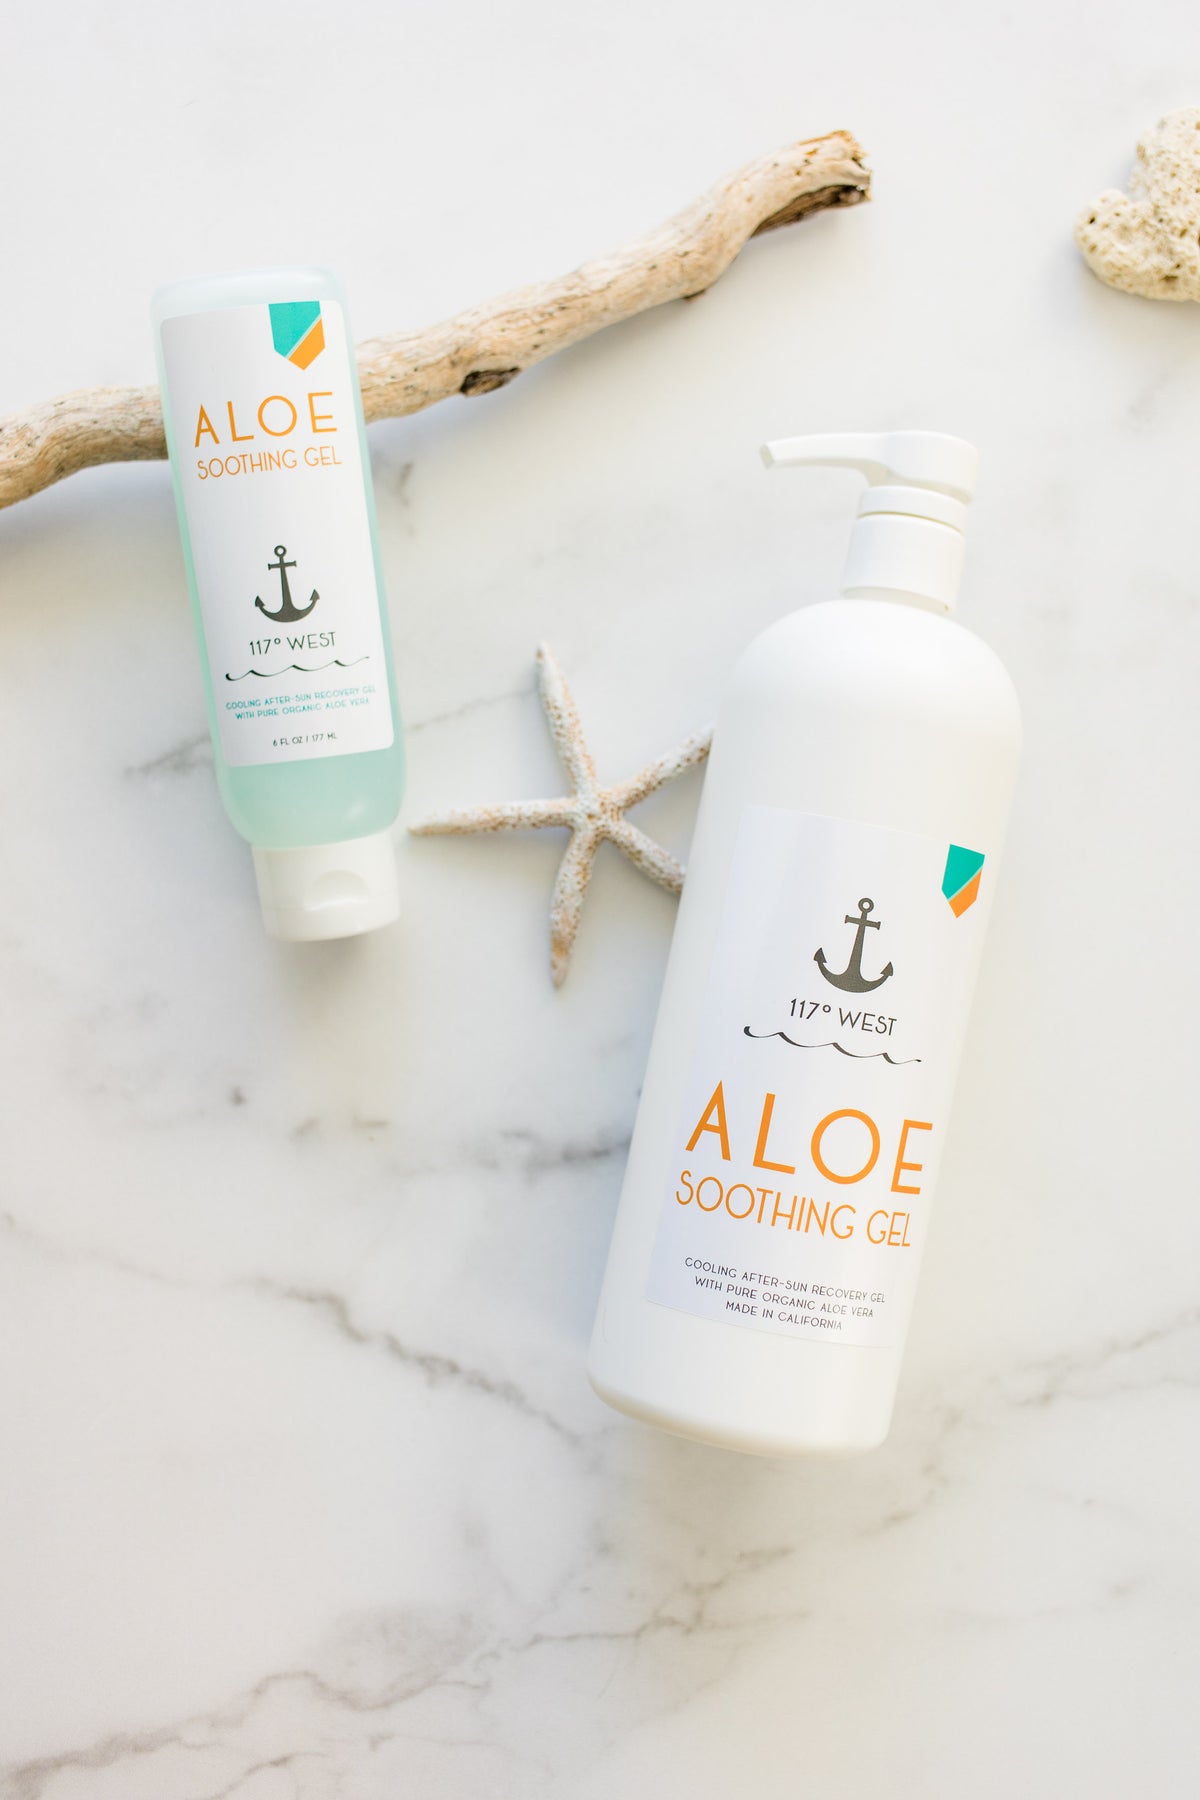 two aloe soothing gels with marble background